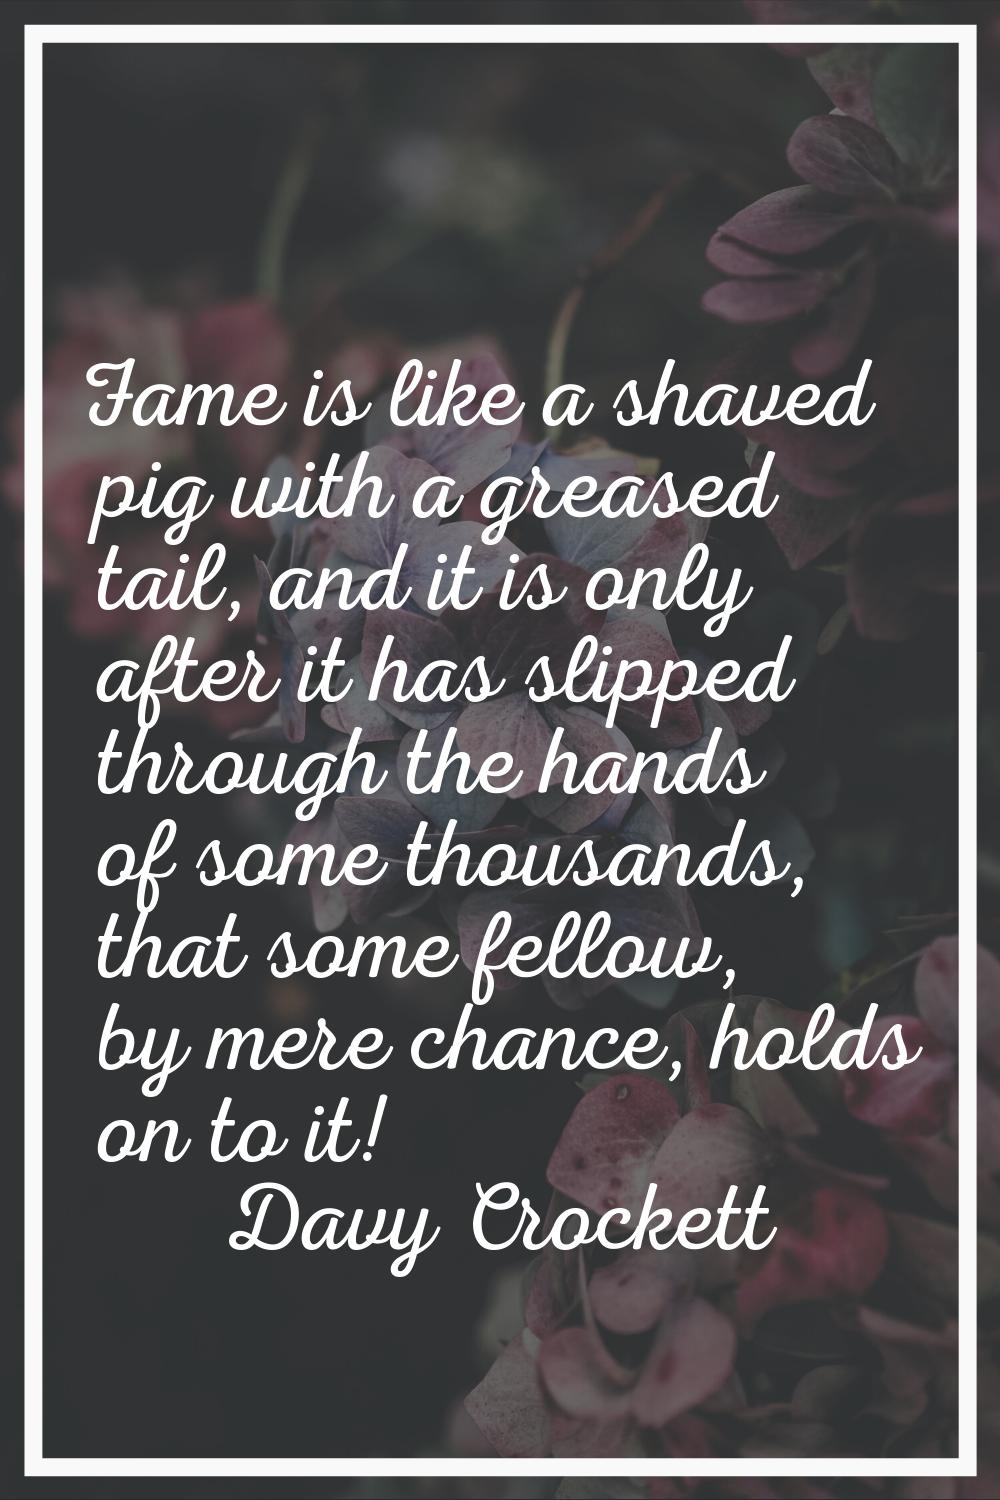 Fame is like a shaved pig with a greased tail, and it is only after it has slipped through the hand